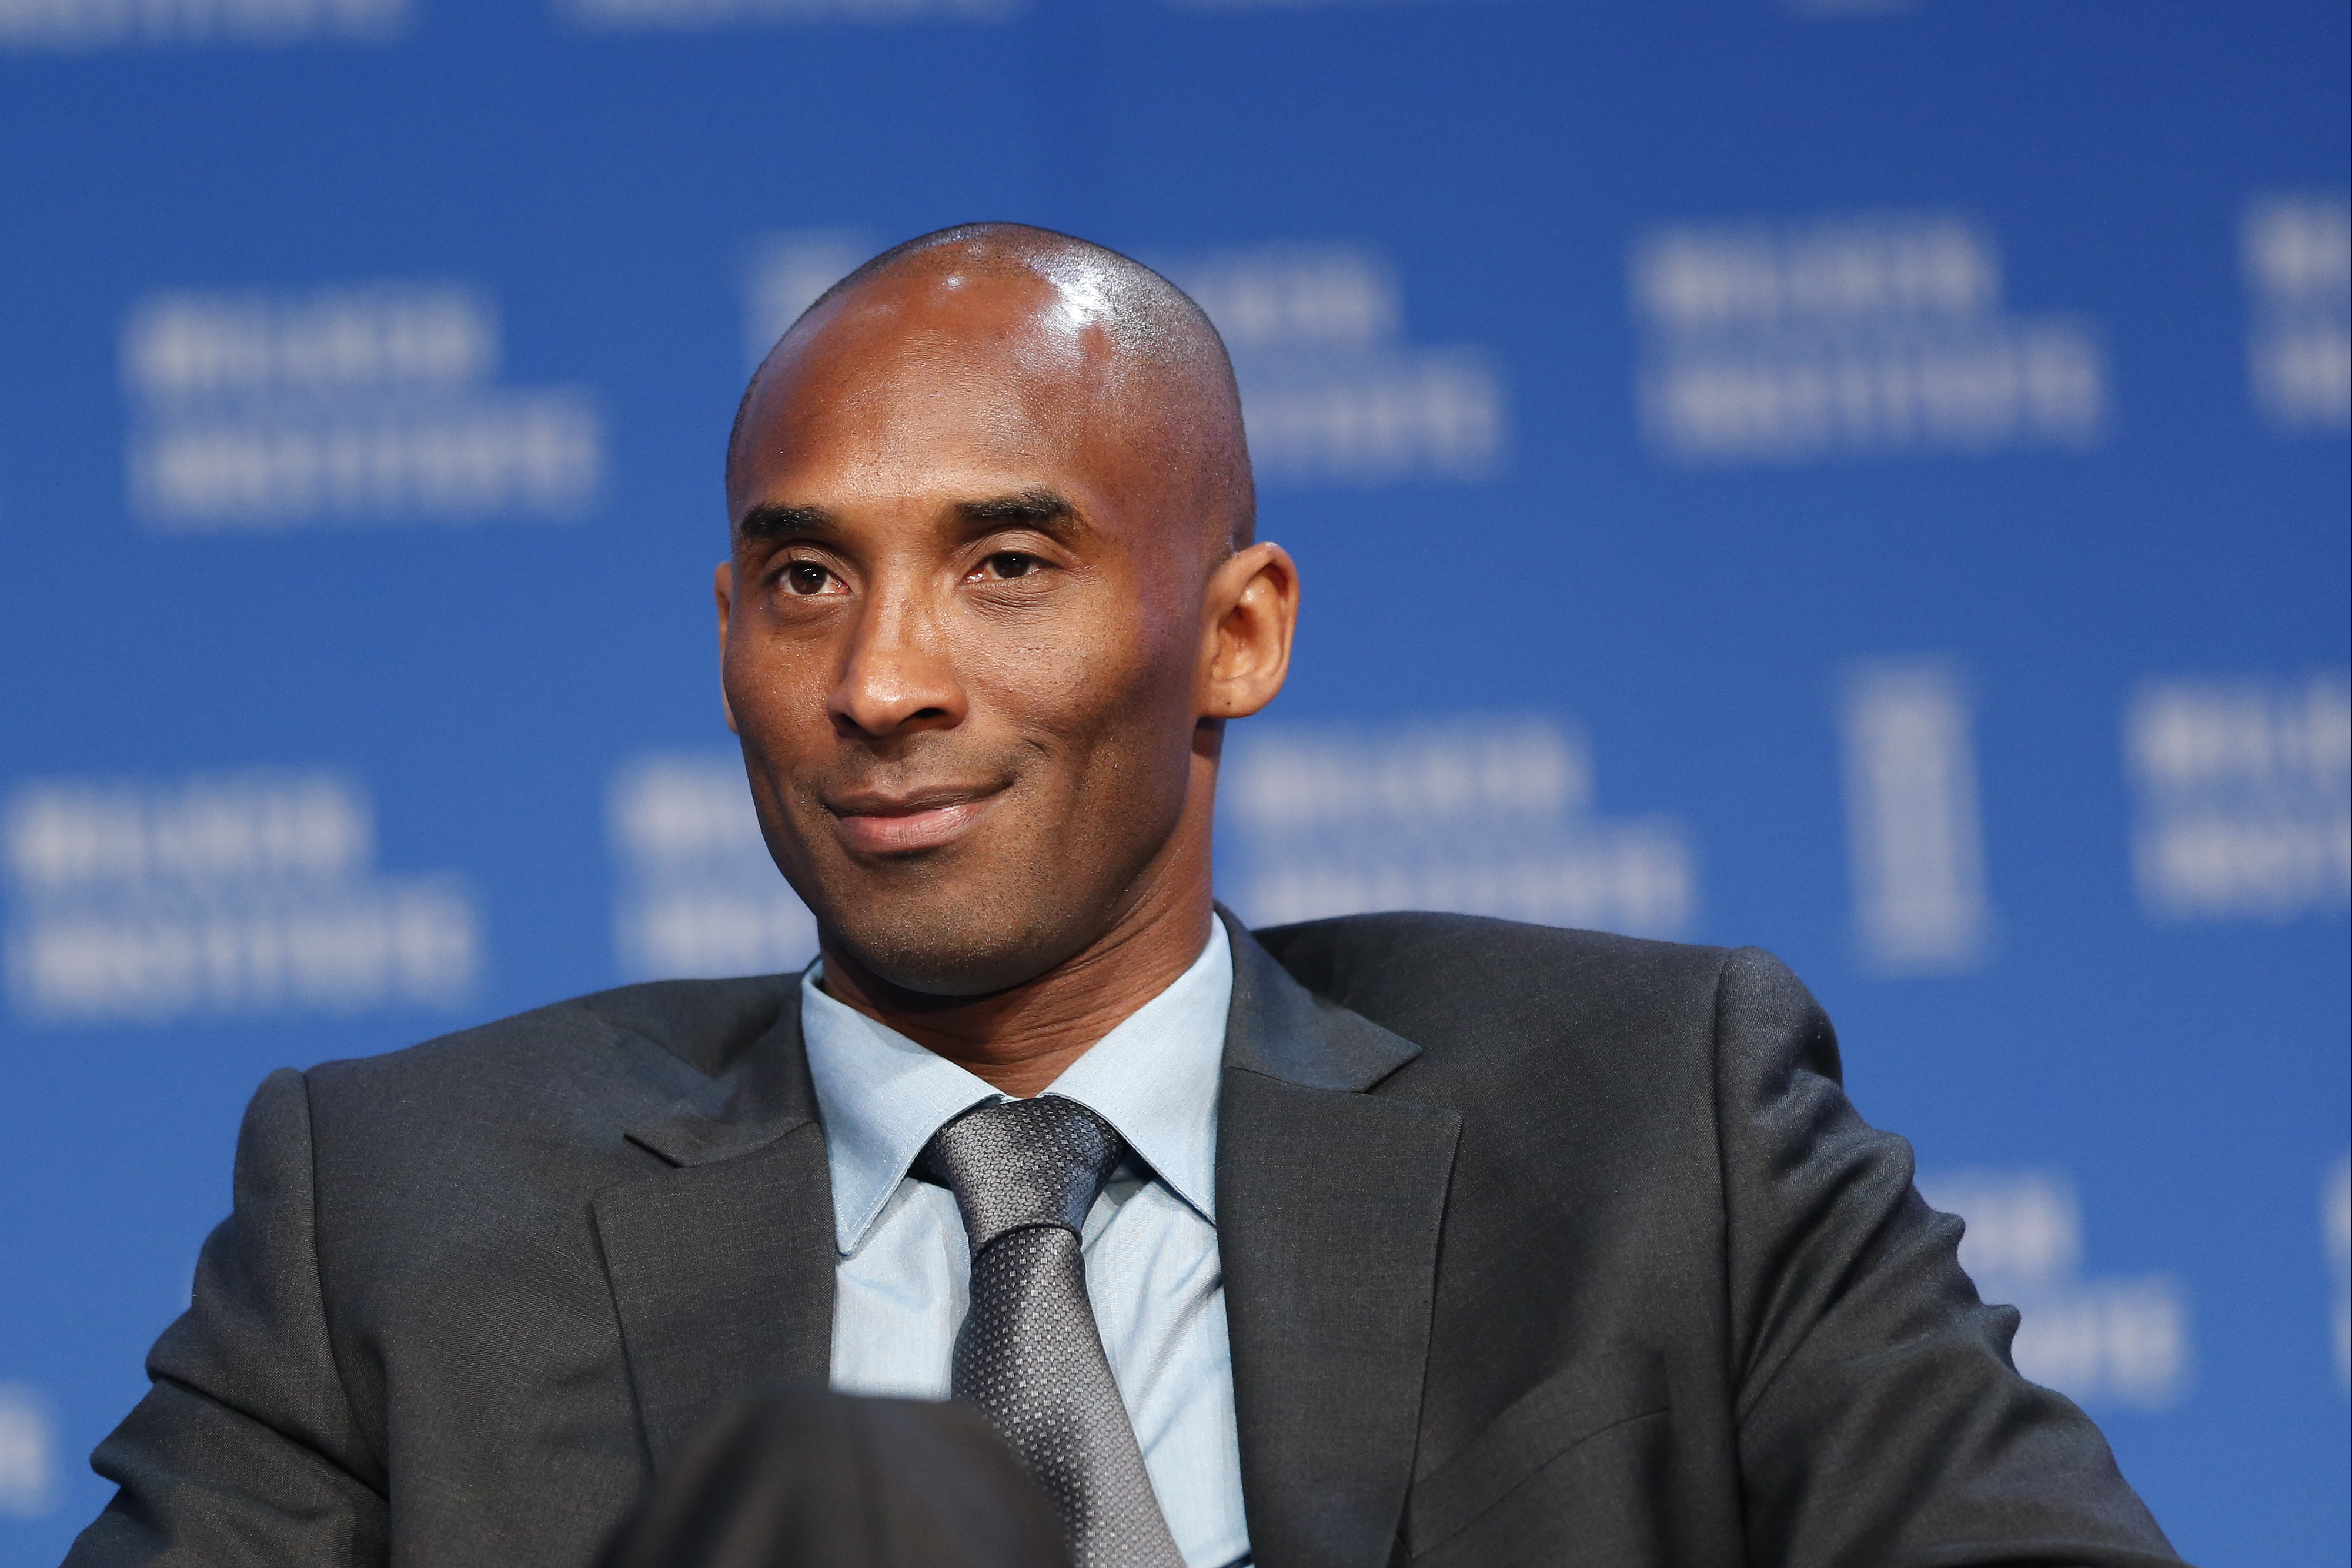 Kobe Bryant, retired Lakers National Basketball Association (NBA) player, smiles during the annual Milken Institute Global Conference in Beverly Hills, California, U.S., on Tuesday, May 3, 2016. The conference gathers attendees to explore solutions to today